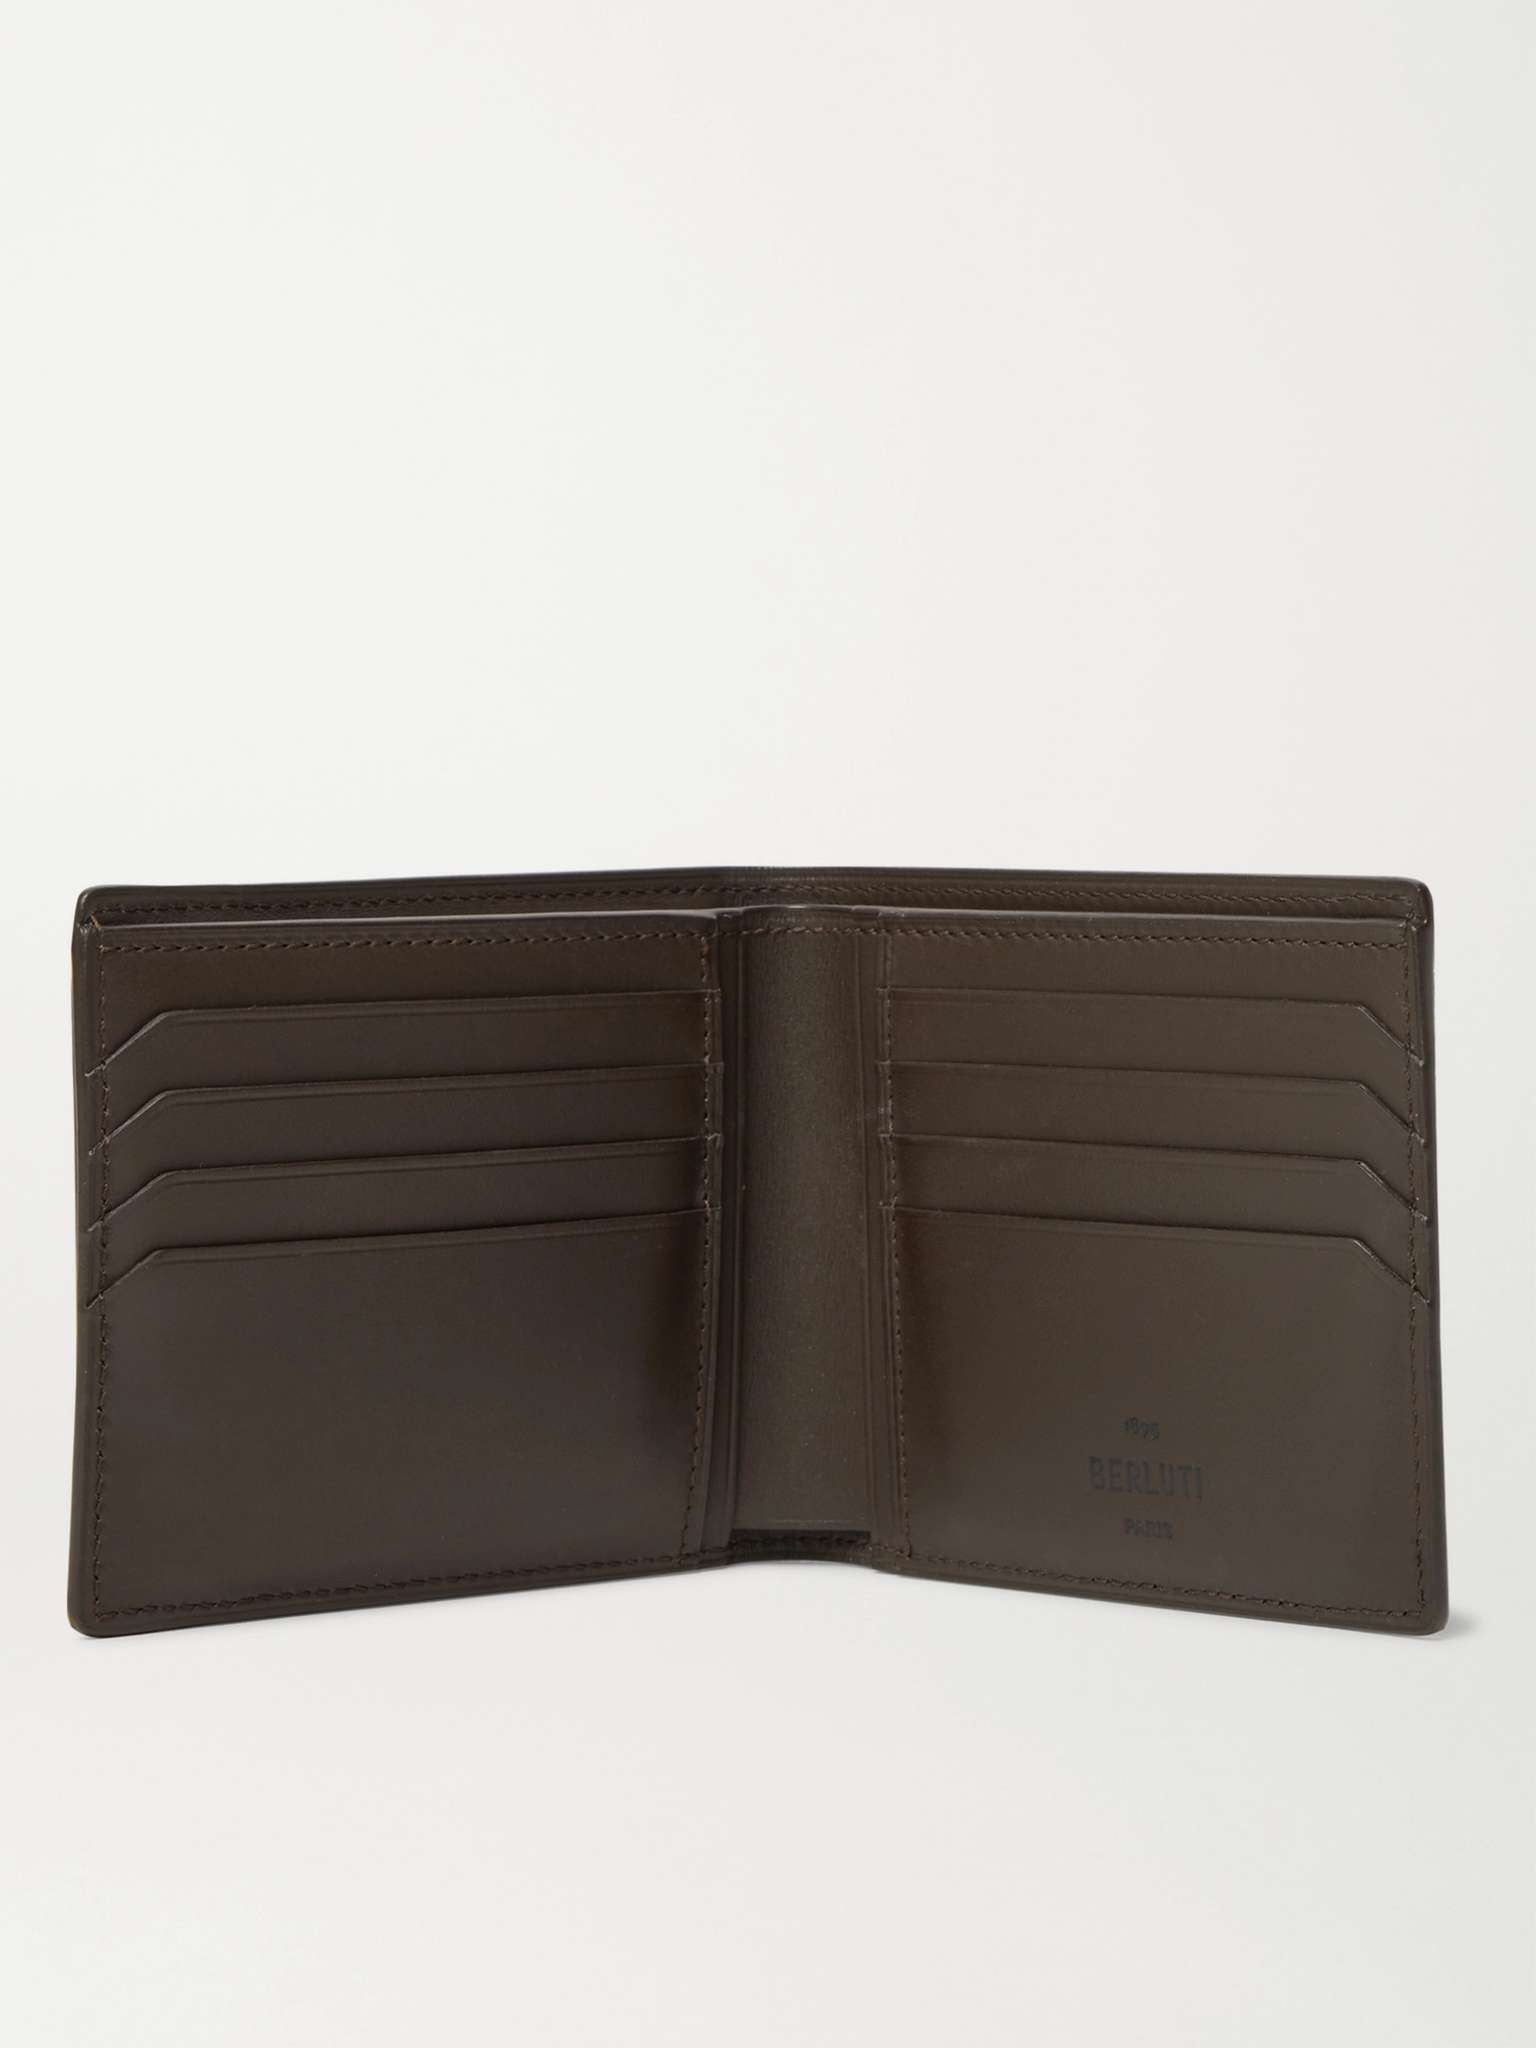 Scritto Leather Billfold Wallet with Cardholder - 2